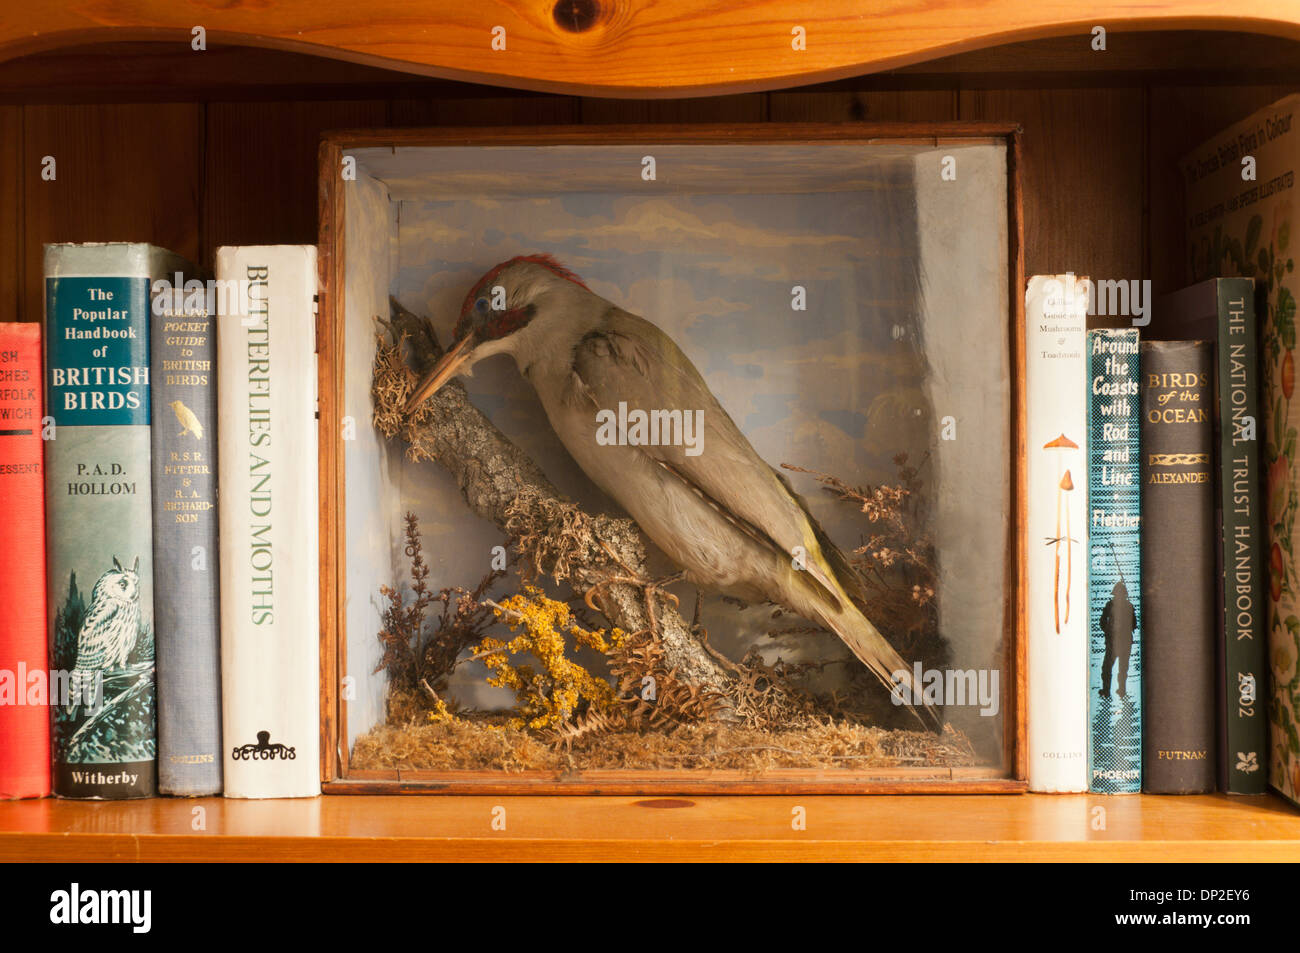 A stuffed green woodpecker (Picus viridis) in a display case on a shelf of natural history books. Stock Photo